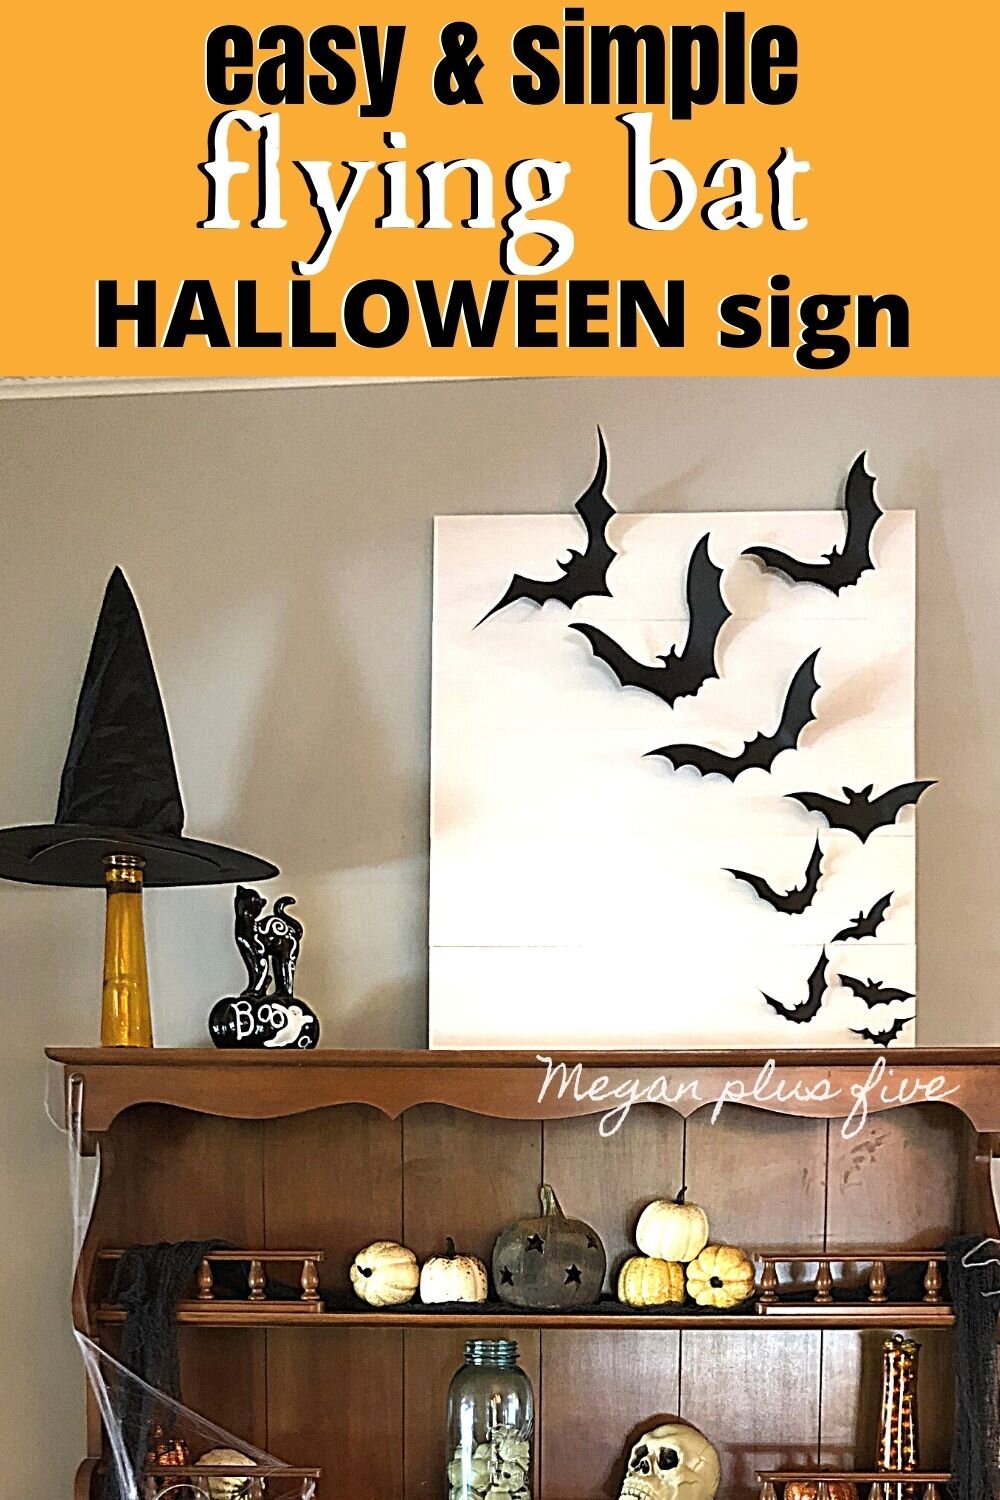 DIY flying bat sign using your Cricut cutting machine. How to make cardstock flying bats for Halloween. Easy and simple rustic Halloween Decor for your farmhouse style